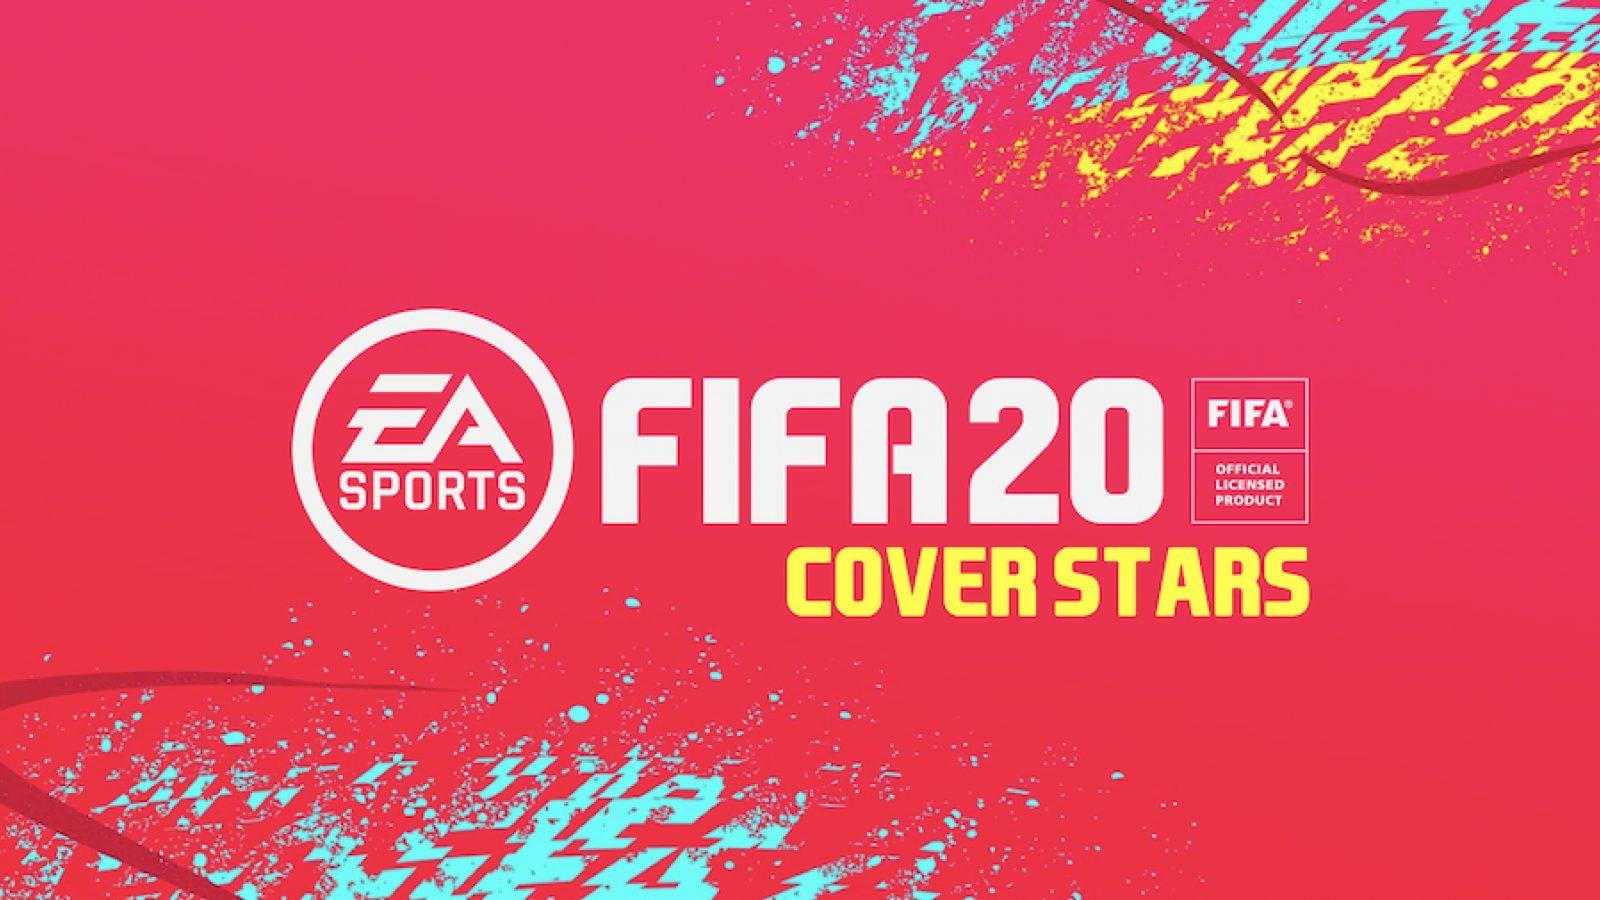 Two FIFA 20 cover stars revealed